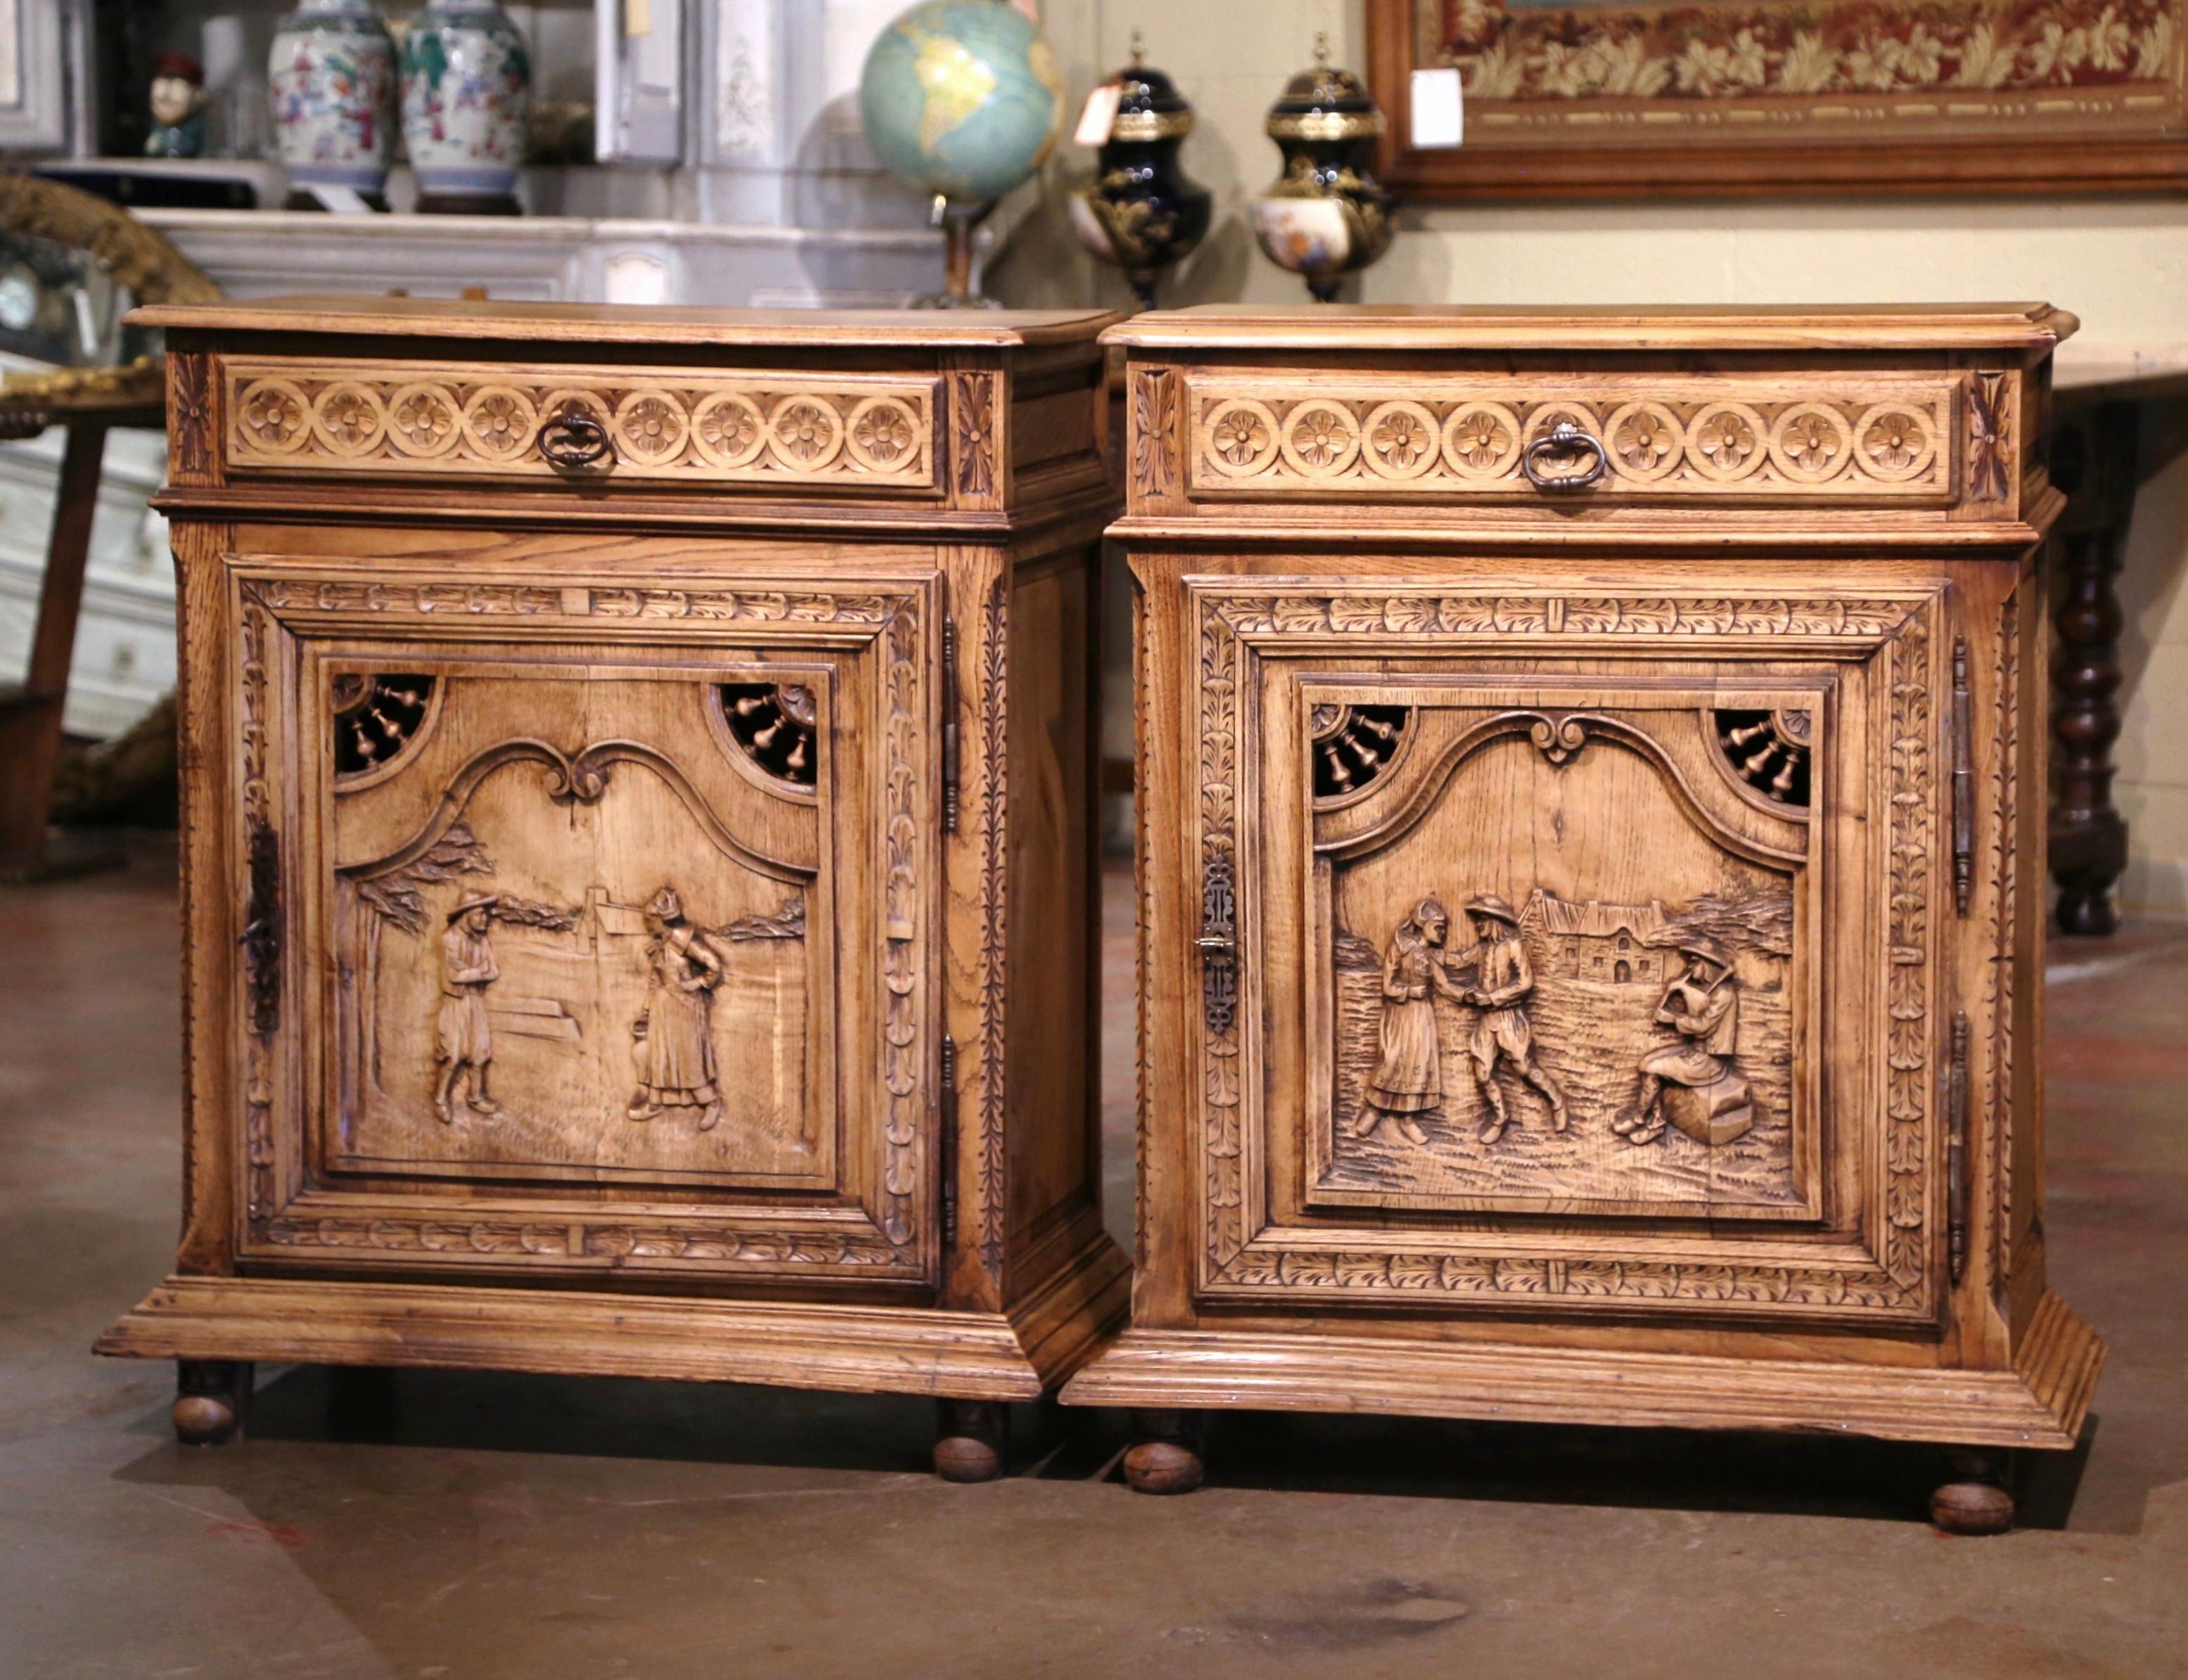  19th Century French Carved Bleached Oak Cabinets from Brittany, Set of Two For Sale 3